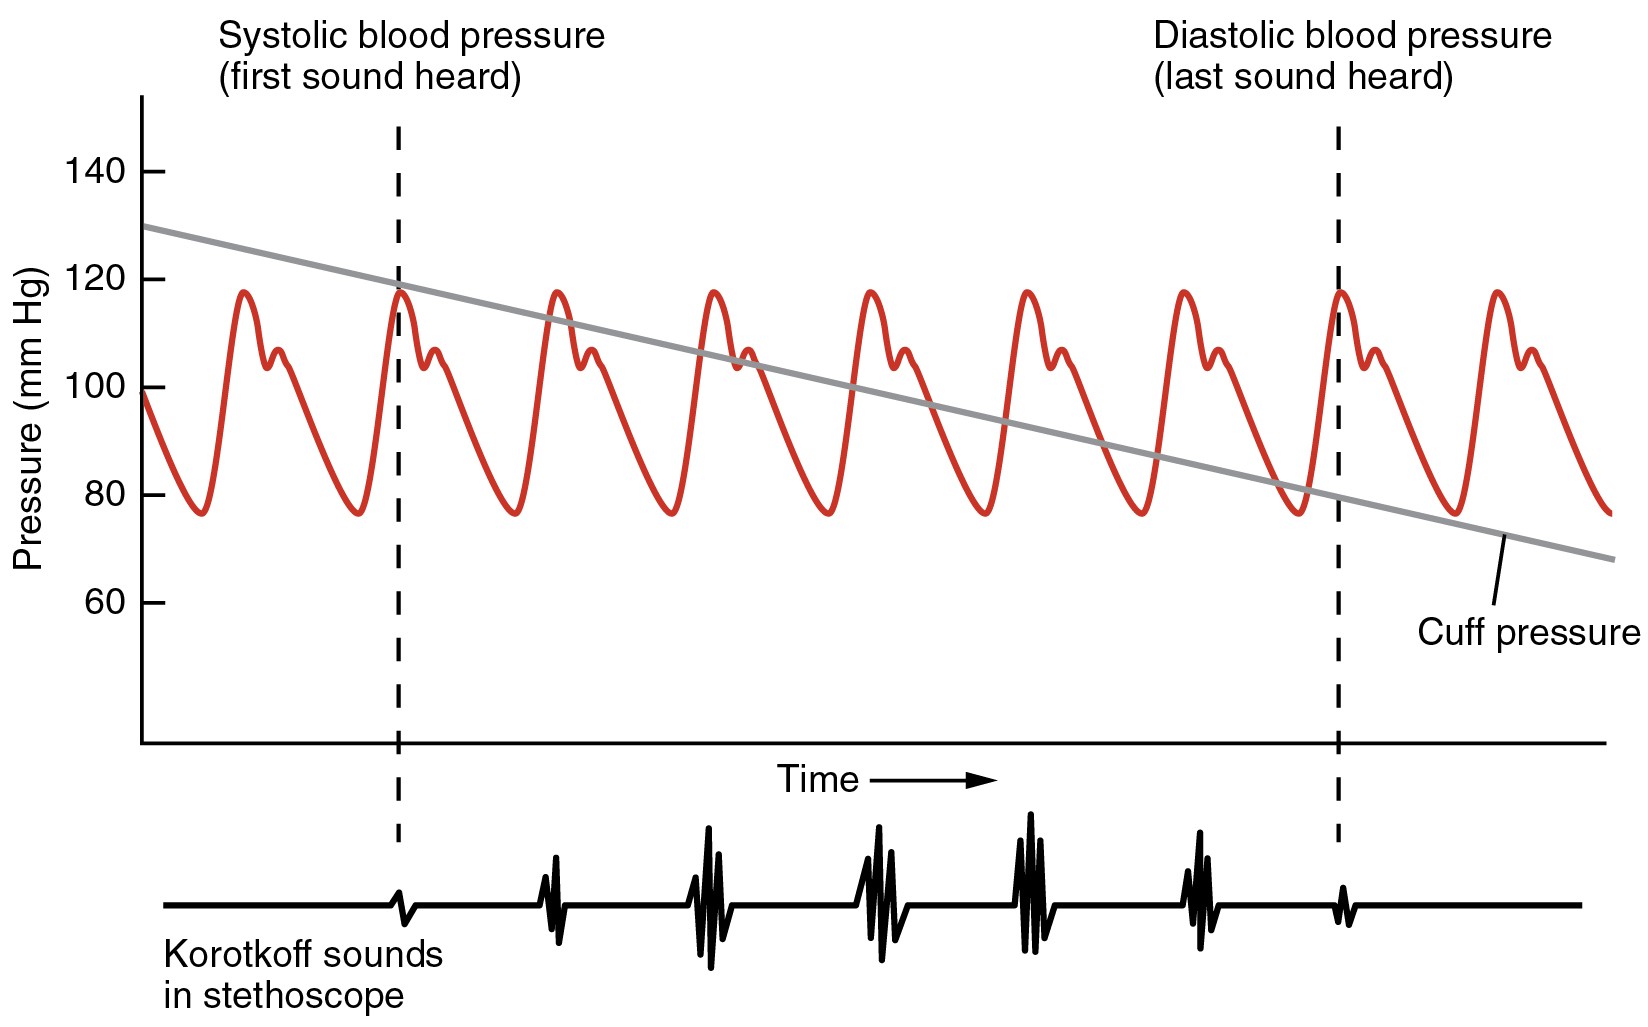 This image shows blood pressure as a function of time